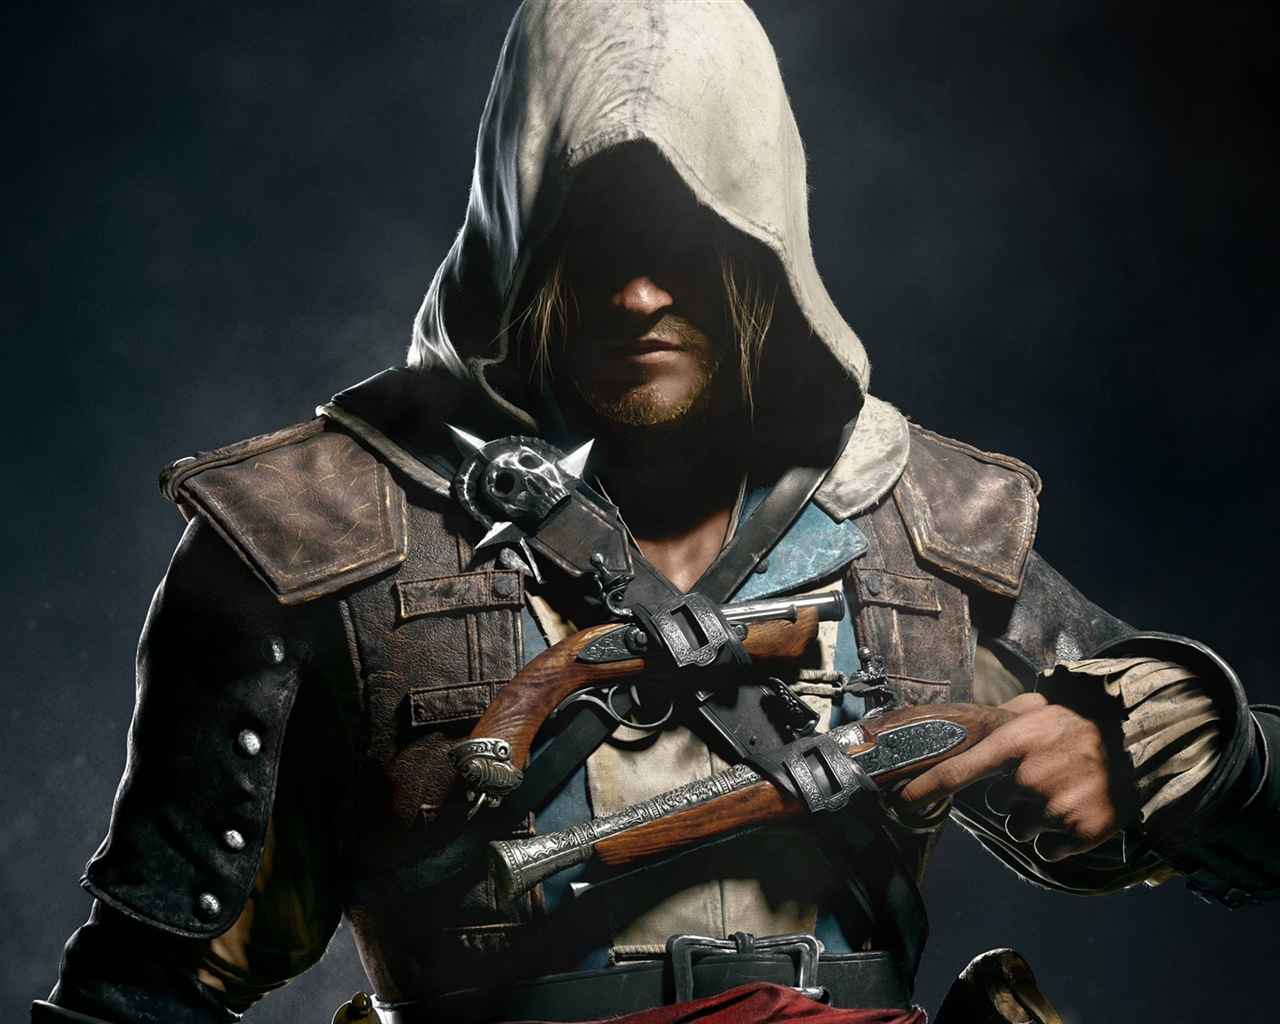 Creed IV Assassin: Black Flag HD wallpapers #13 - 1280x1024